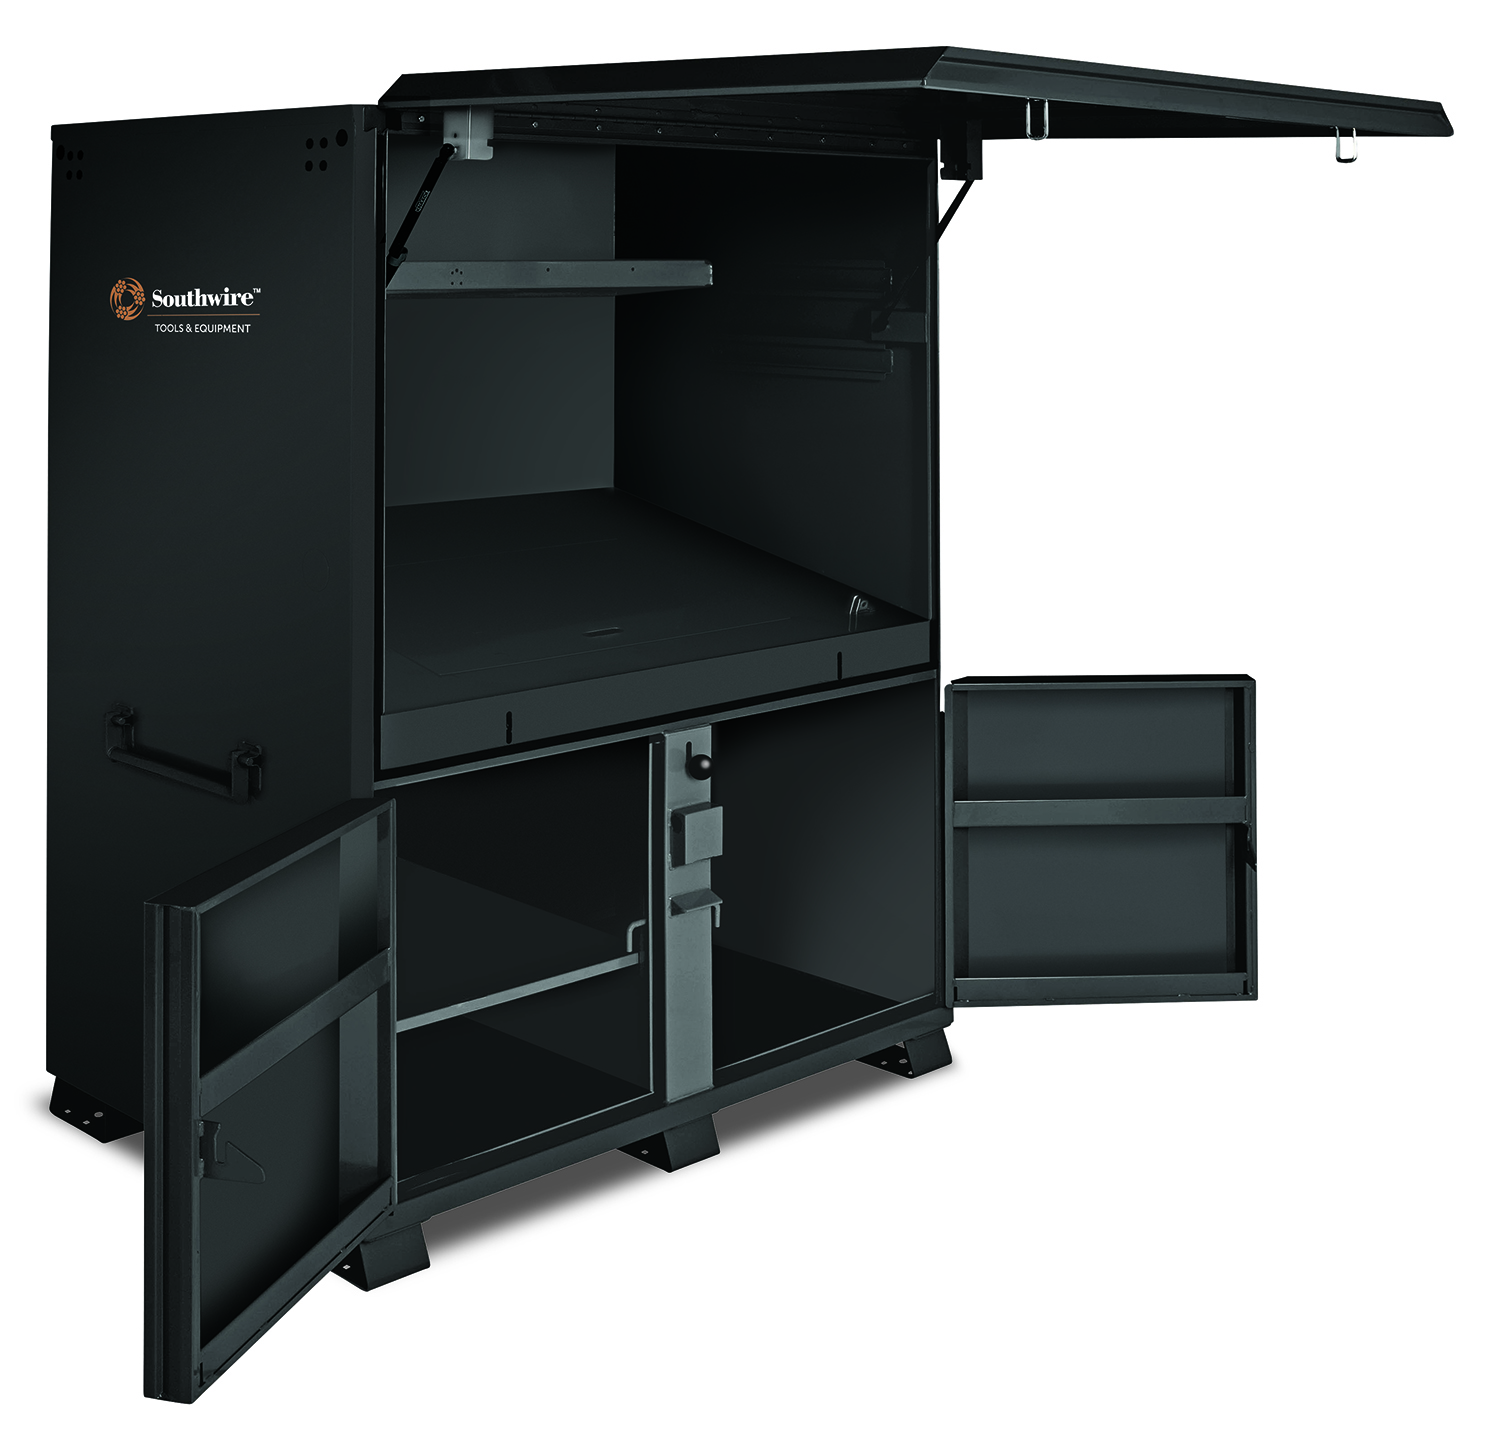 FO604482 032886959929 Southwires Field office brings the contractor a mobile working platform that incoperates a large area for working with prints and drawings. Combine this with the added shelved storage, giving you all the space needed for success. With the Southwire Field Office there is no better way to control and secure your livelihood. Field Office